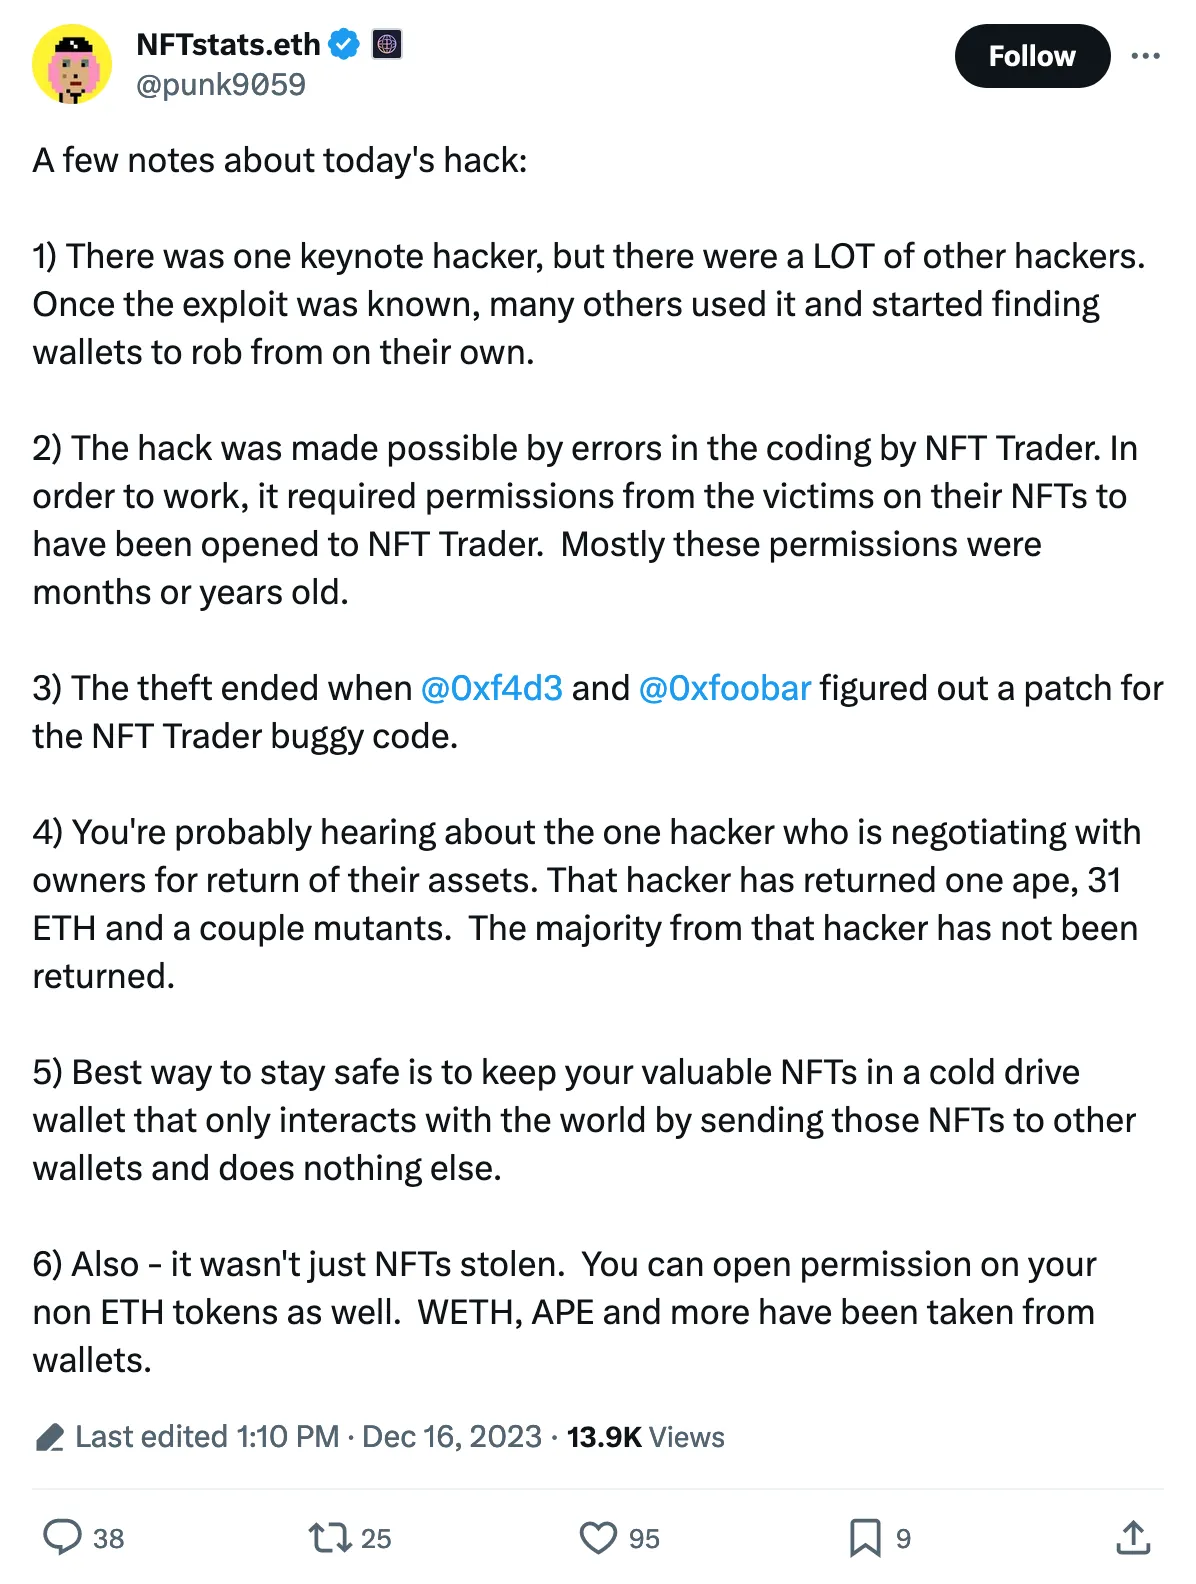 A few notes about today's hack:

1) There was one keynote hacker, but there were a LOT of other hackers. Once the exploit was known, many others used it and started finding wallets to rob from on their own.

2) The hack was made possible by errors in the coding by NFT Trader. In order to work, it required permissions from the victims on their NFTs to have been opened to NFT Trader.  Mostly these permissions were months or years old.

3) The theft ended when 
@0xf4d3
 and 
@0xfoobar
 figured out a patch for the NFT Trader buggy code.

4) You're probably hearing about the one hacker who is negotiating with owners for return of their assets. That hacker has returned one ape, 31 ETH and a couple mutants.  The majority from that hacker has not been returned.  

5) Best way to stay safe is to keep your valuable NFTs in a cold drive wallet that only interacts with the world by sending those NFTs to other wallets and does nothing else.

6) Also - it wasn't just NFTs stolen.  You can open permission on your non ETH tokens as well.  WETH, APE and more have been taken from wallets. 
Tweeted at 1:10 PM · Dec 16, 2023